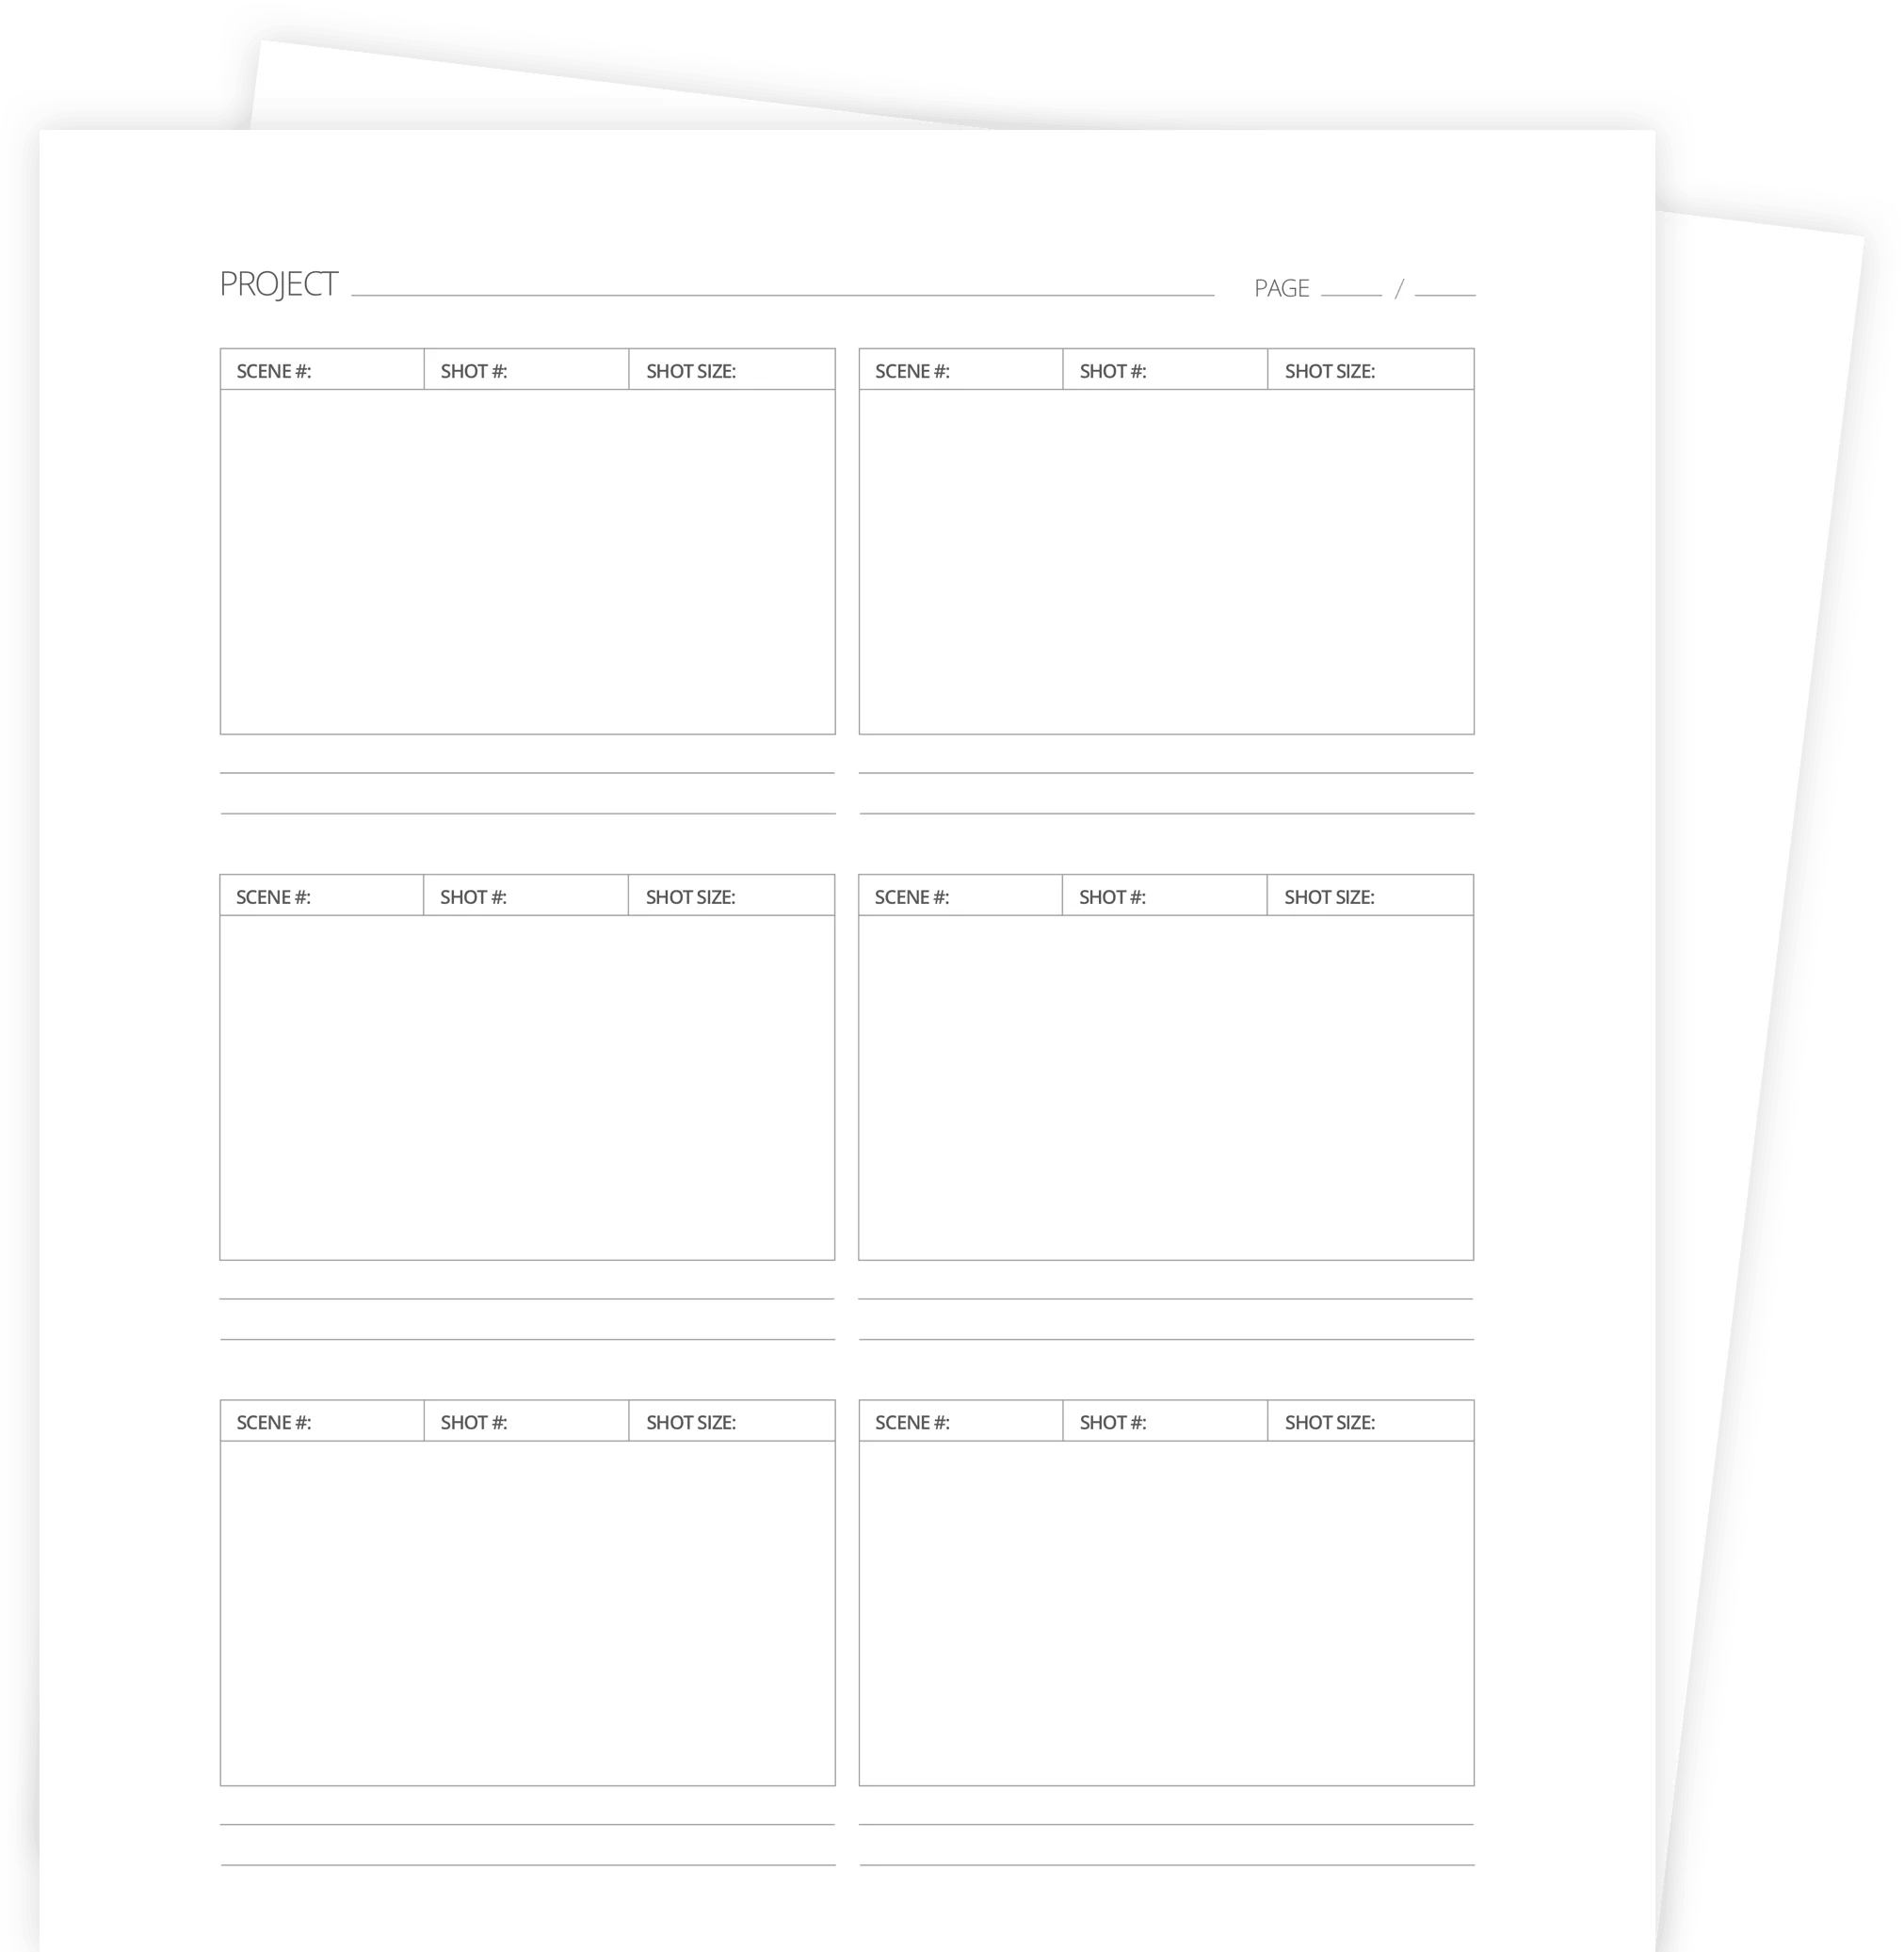 FREE Storyboard Templates & Story board Creator (PDF, PSD, PPT, DOCX) Intended For Microsoft Word Screenplay Template